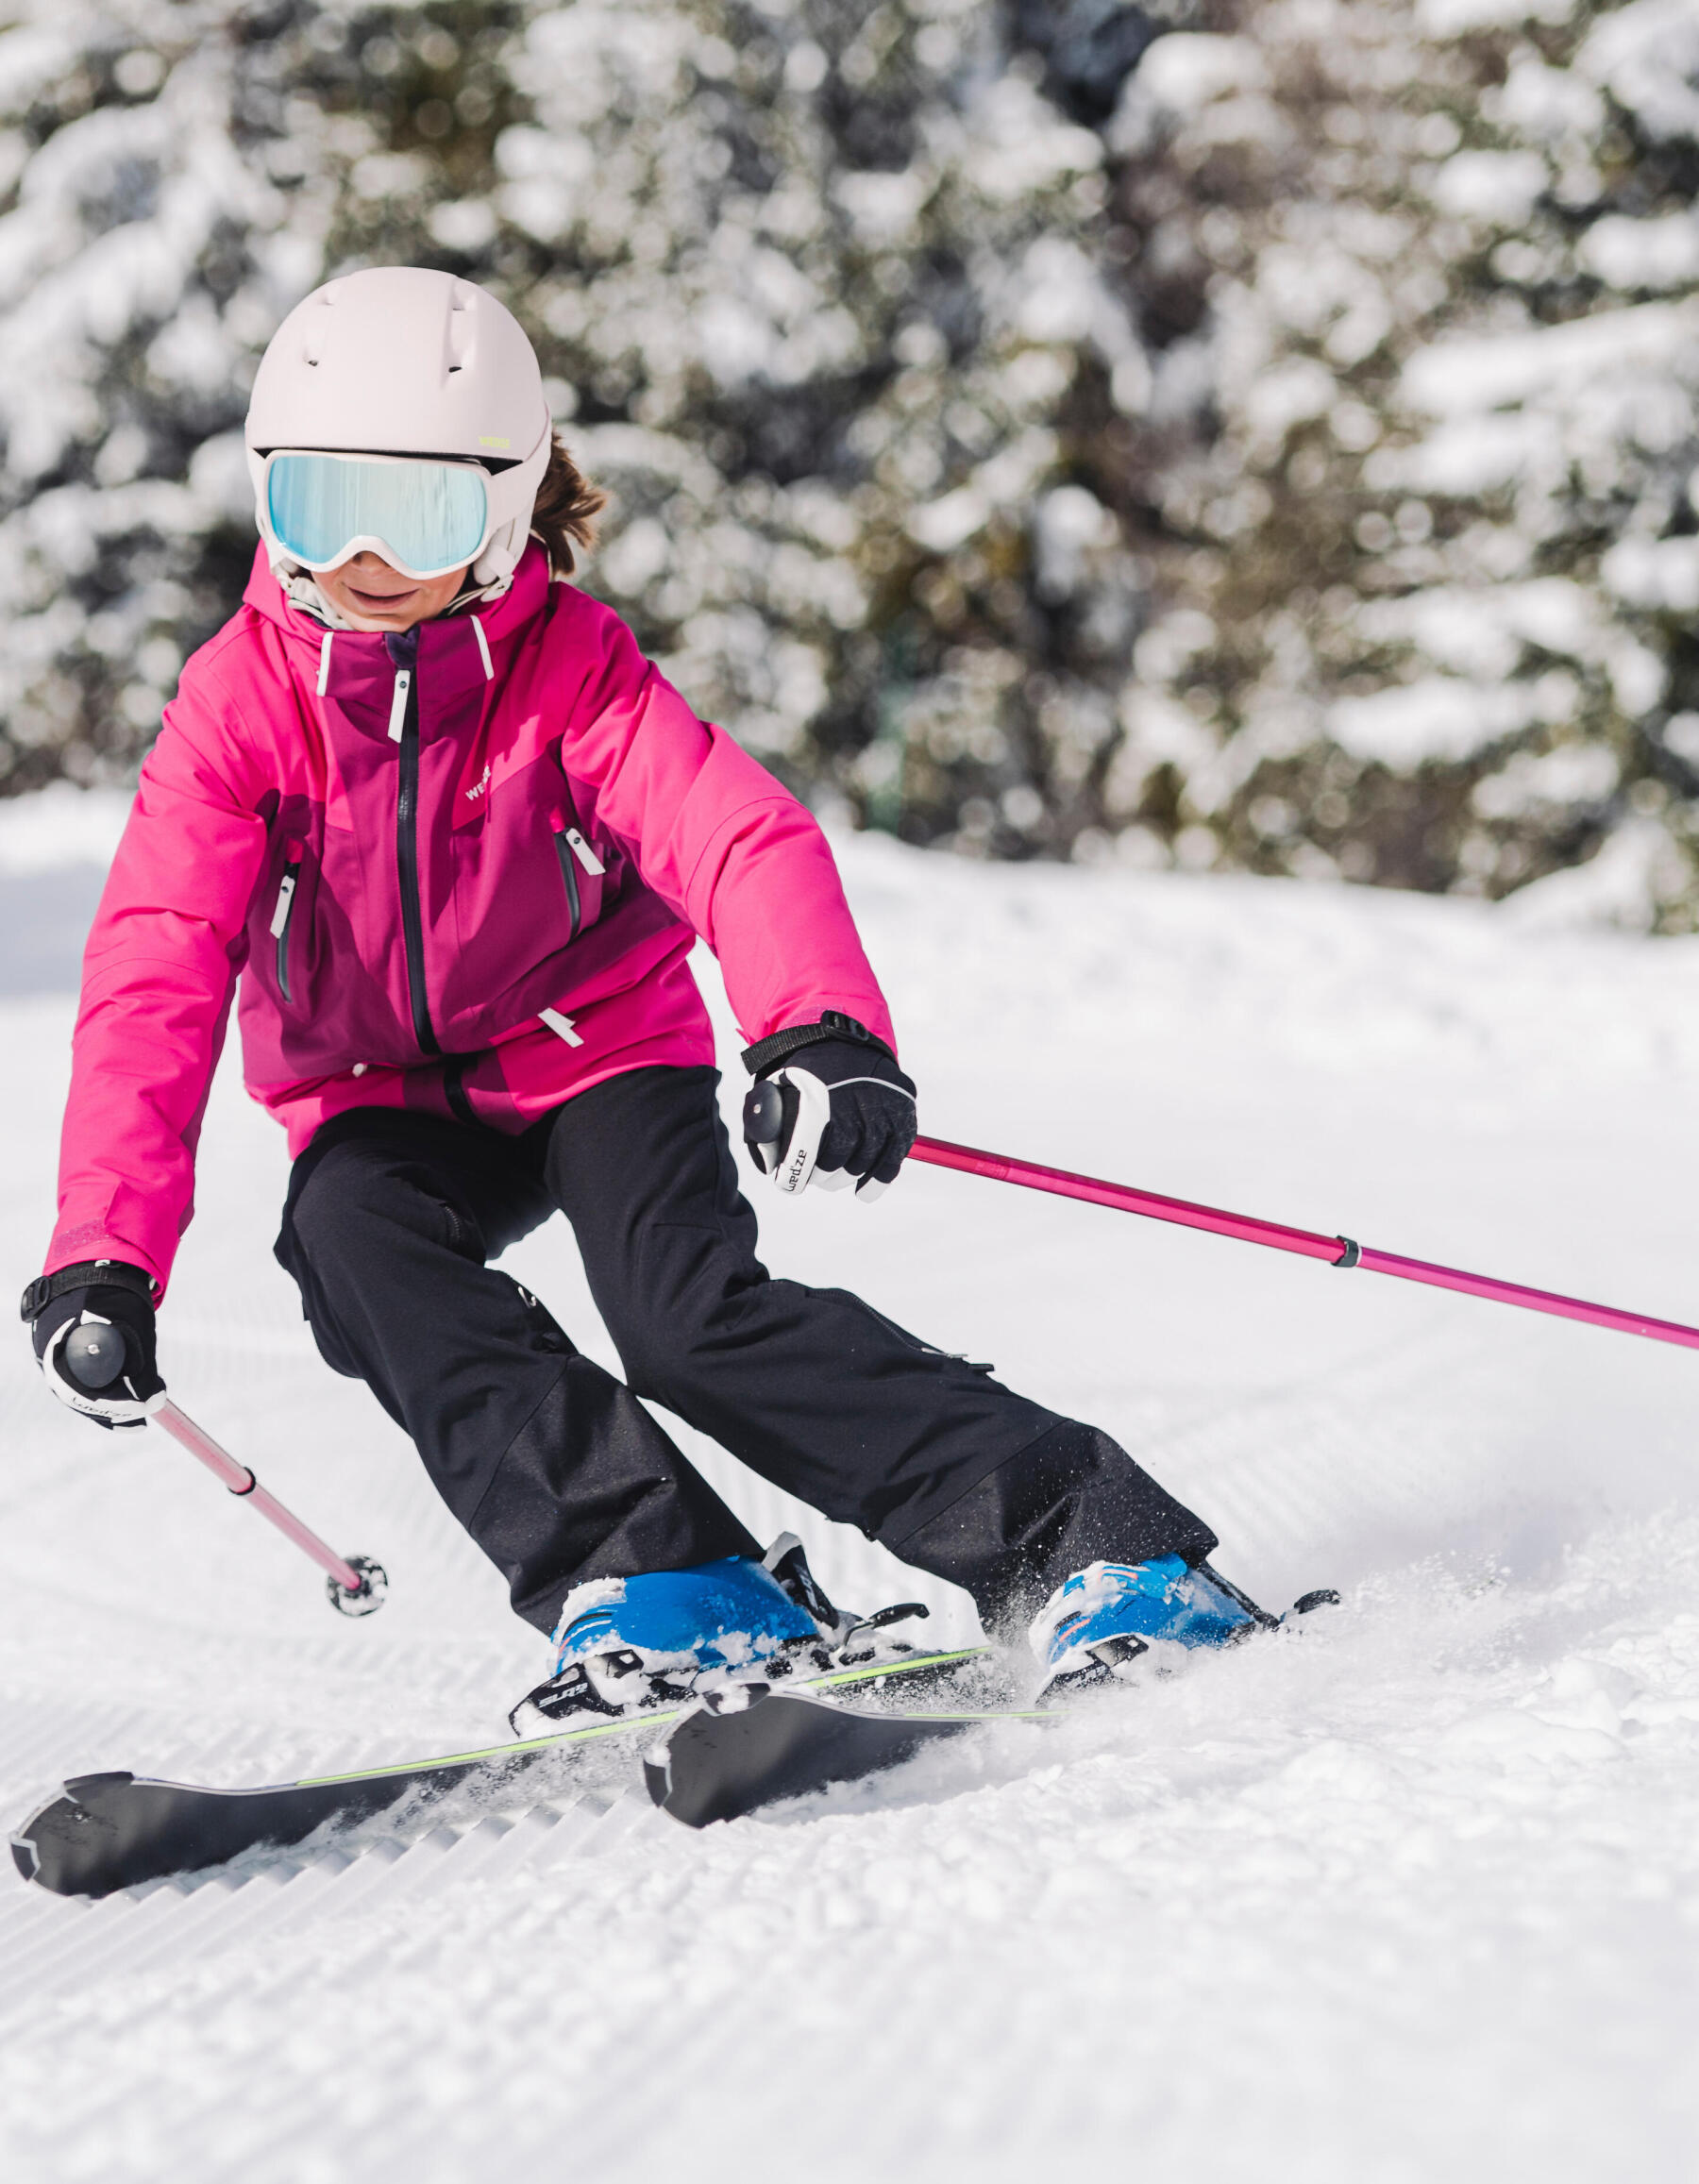 Women's Specific: Are female-focused skis necessity or preference?